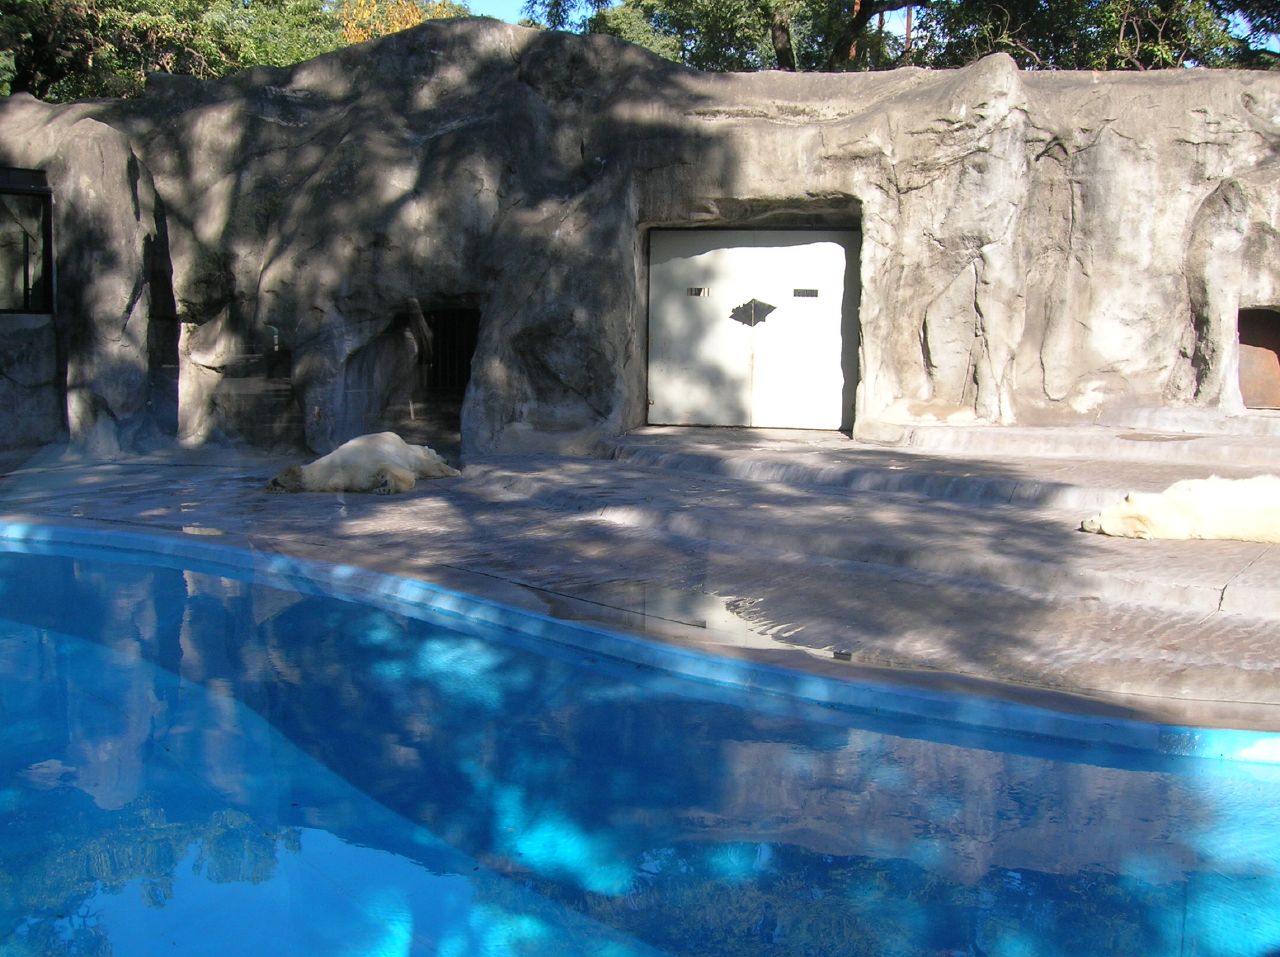 a small pool with an animal in it